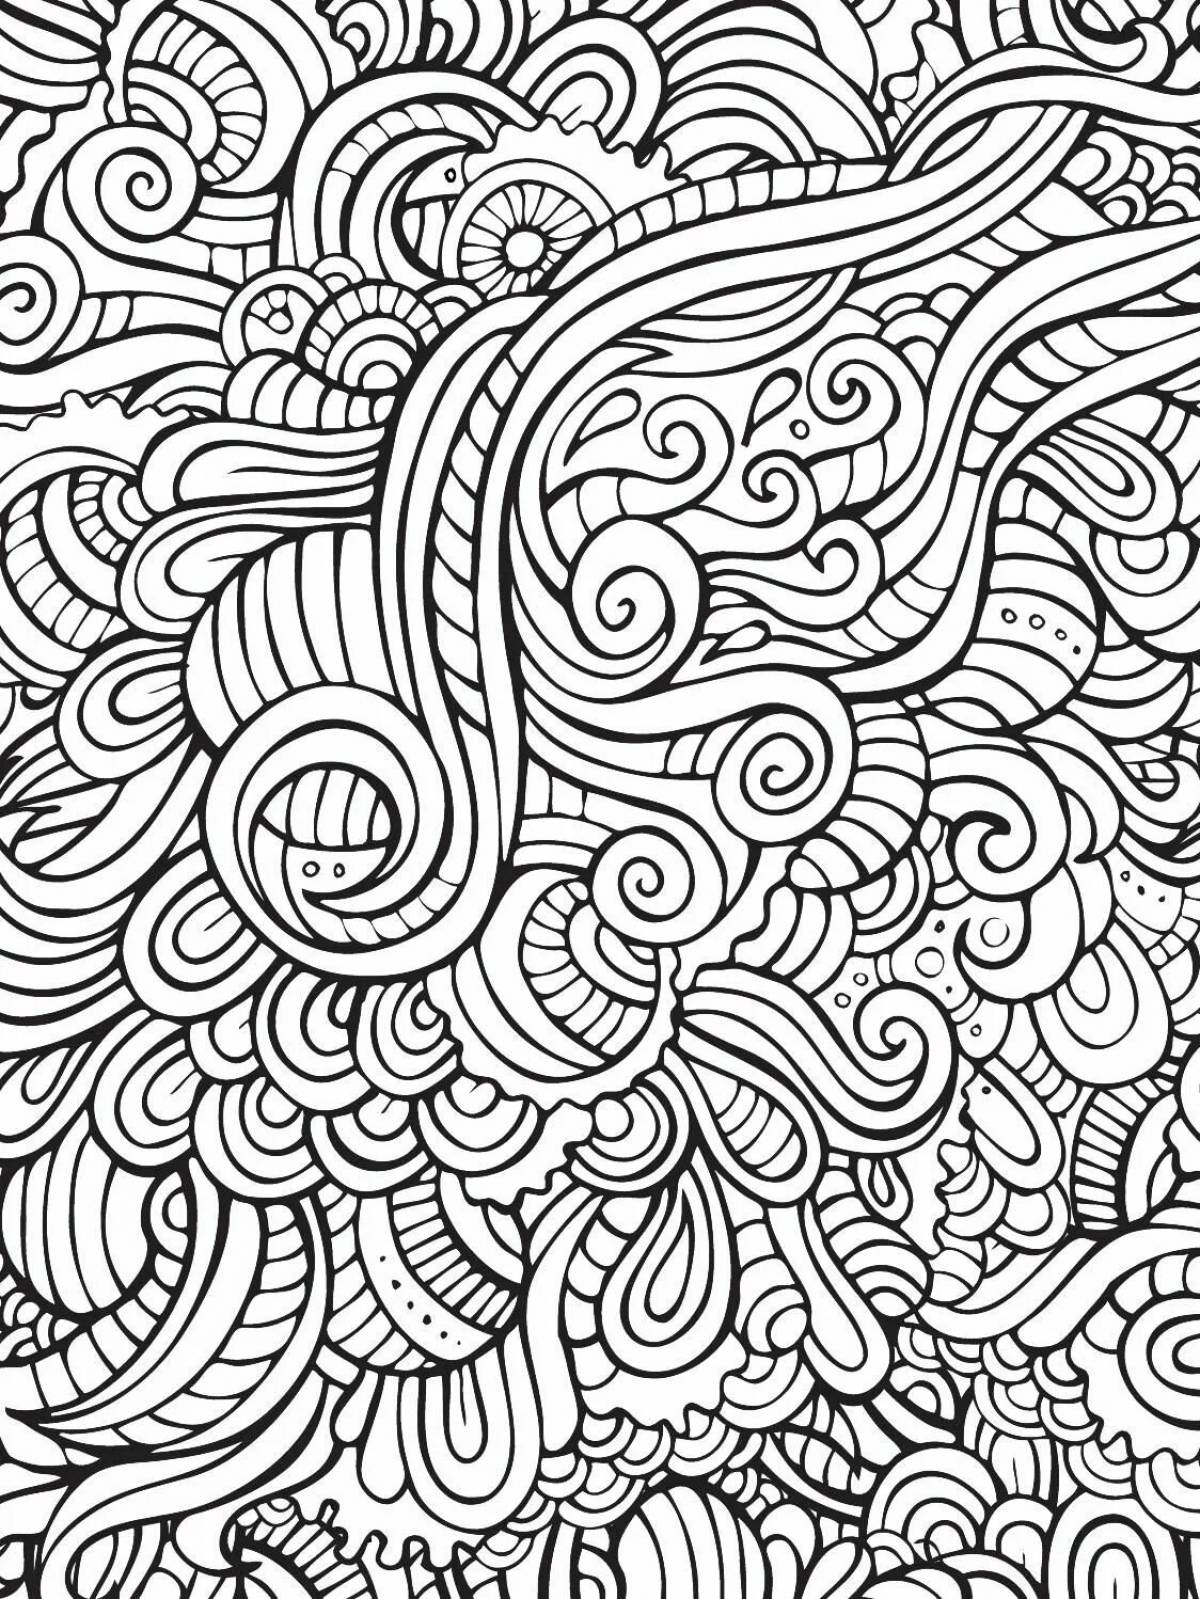 Great patterned coloring book